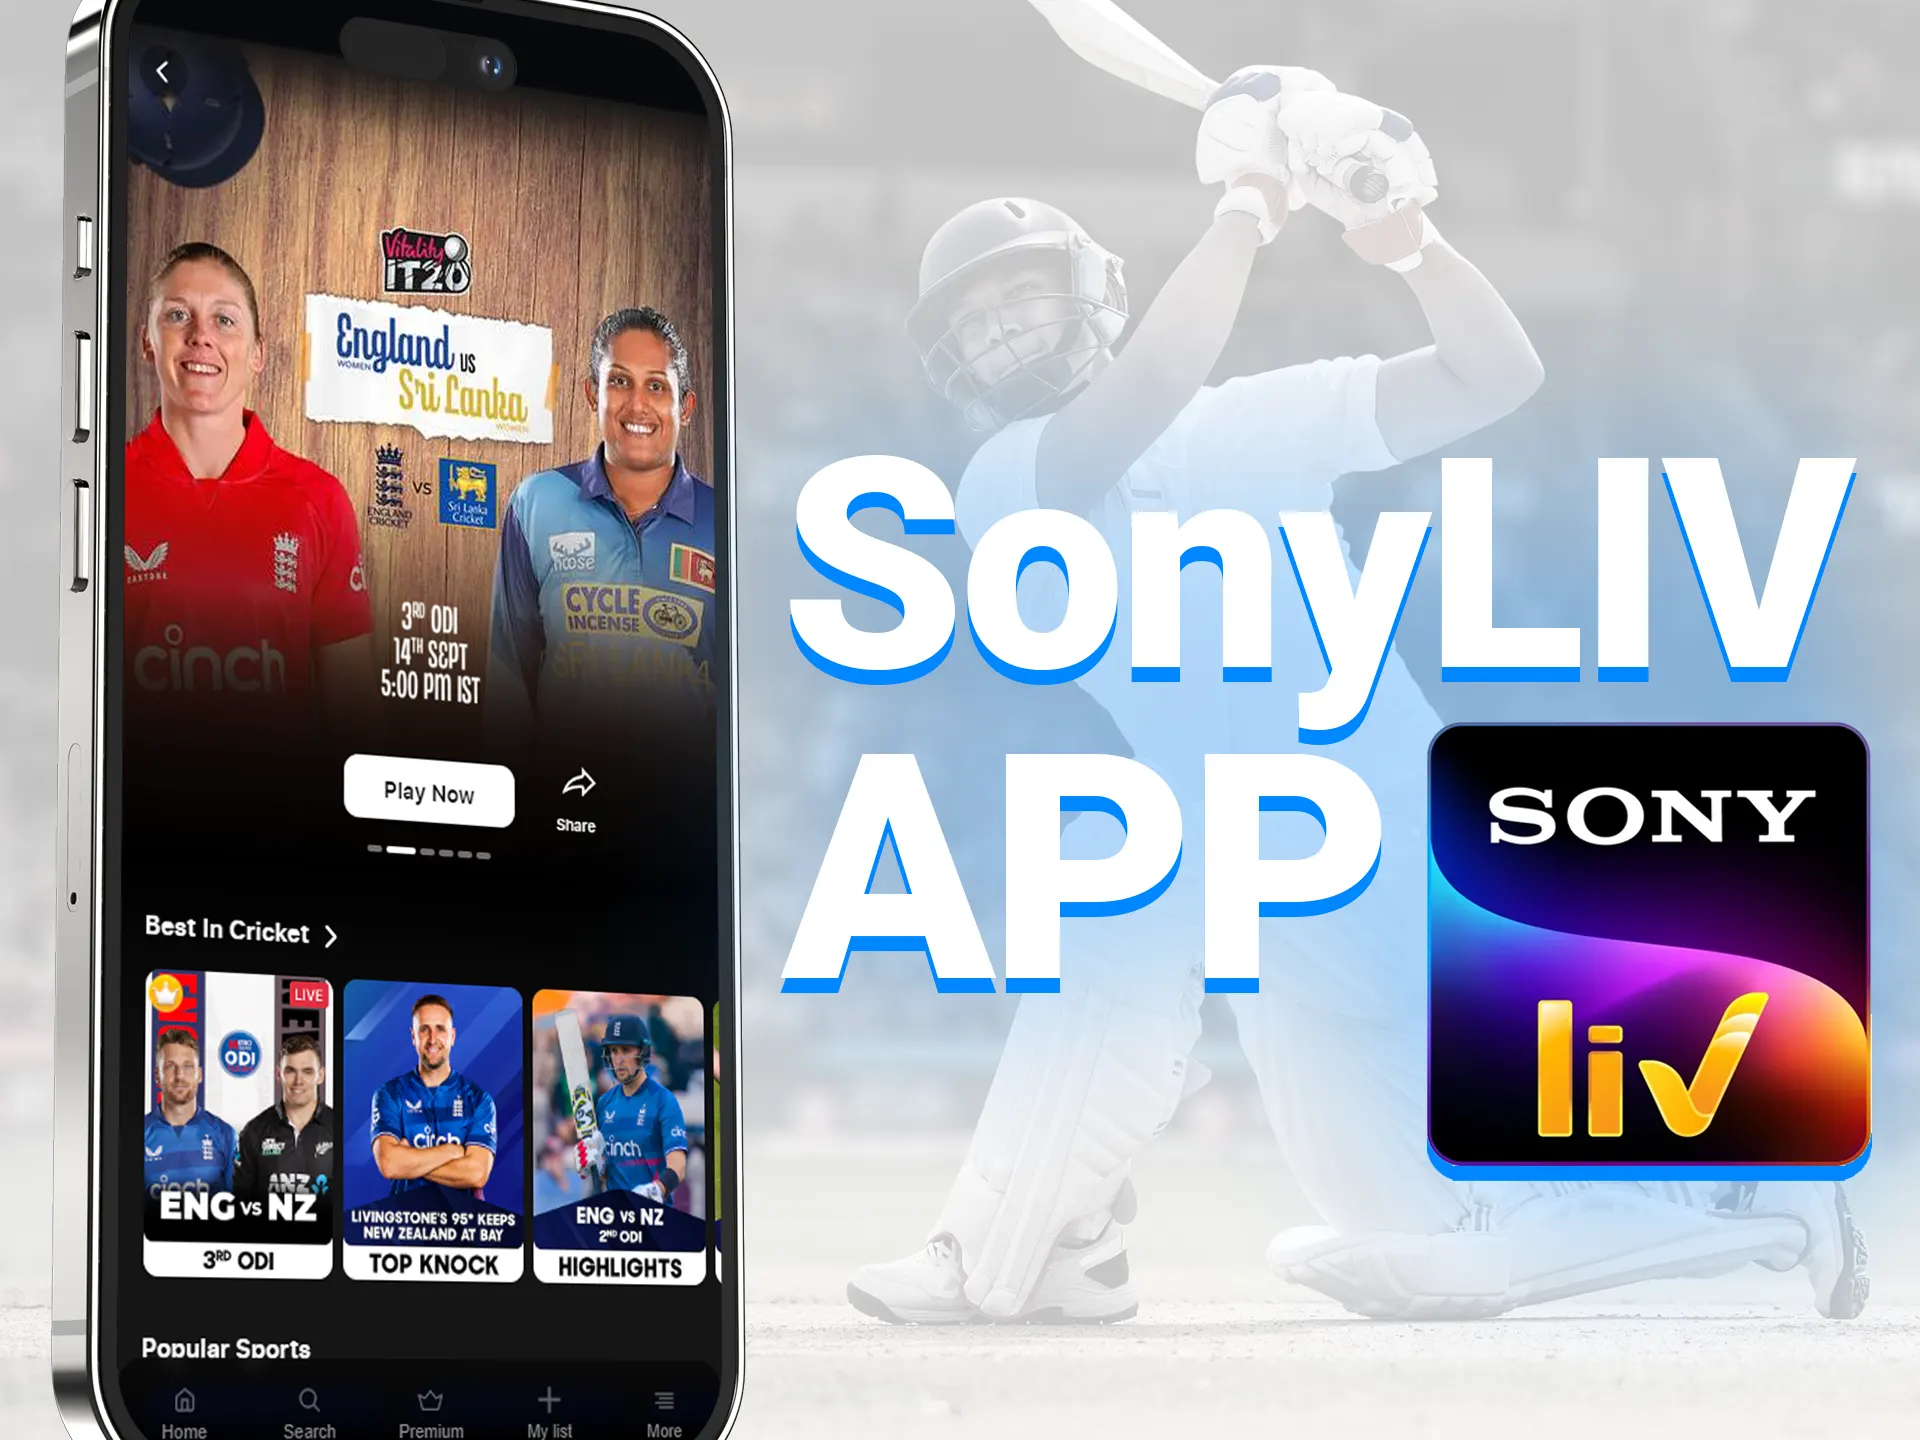 You can watch free online broadcasts on the SonyLIV app, but be prepared for ads.